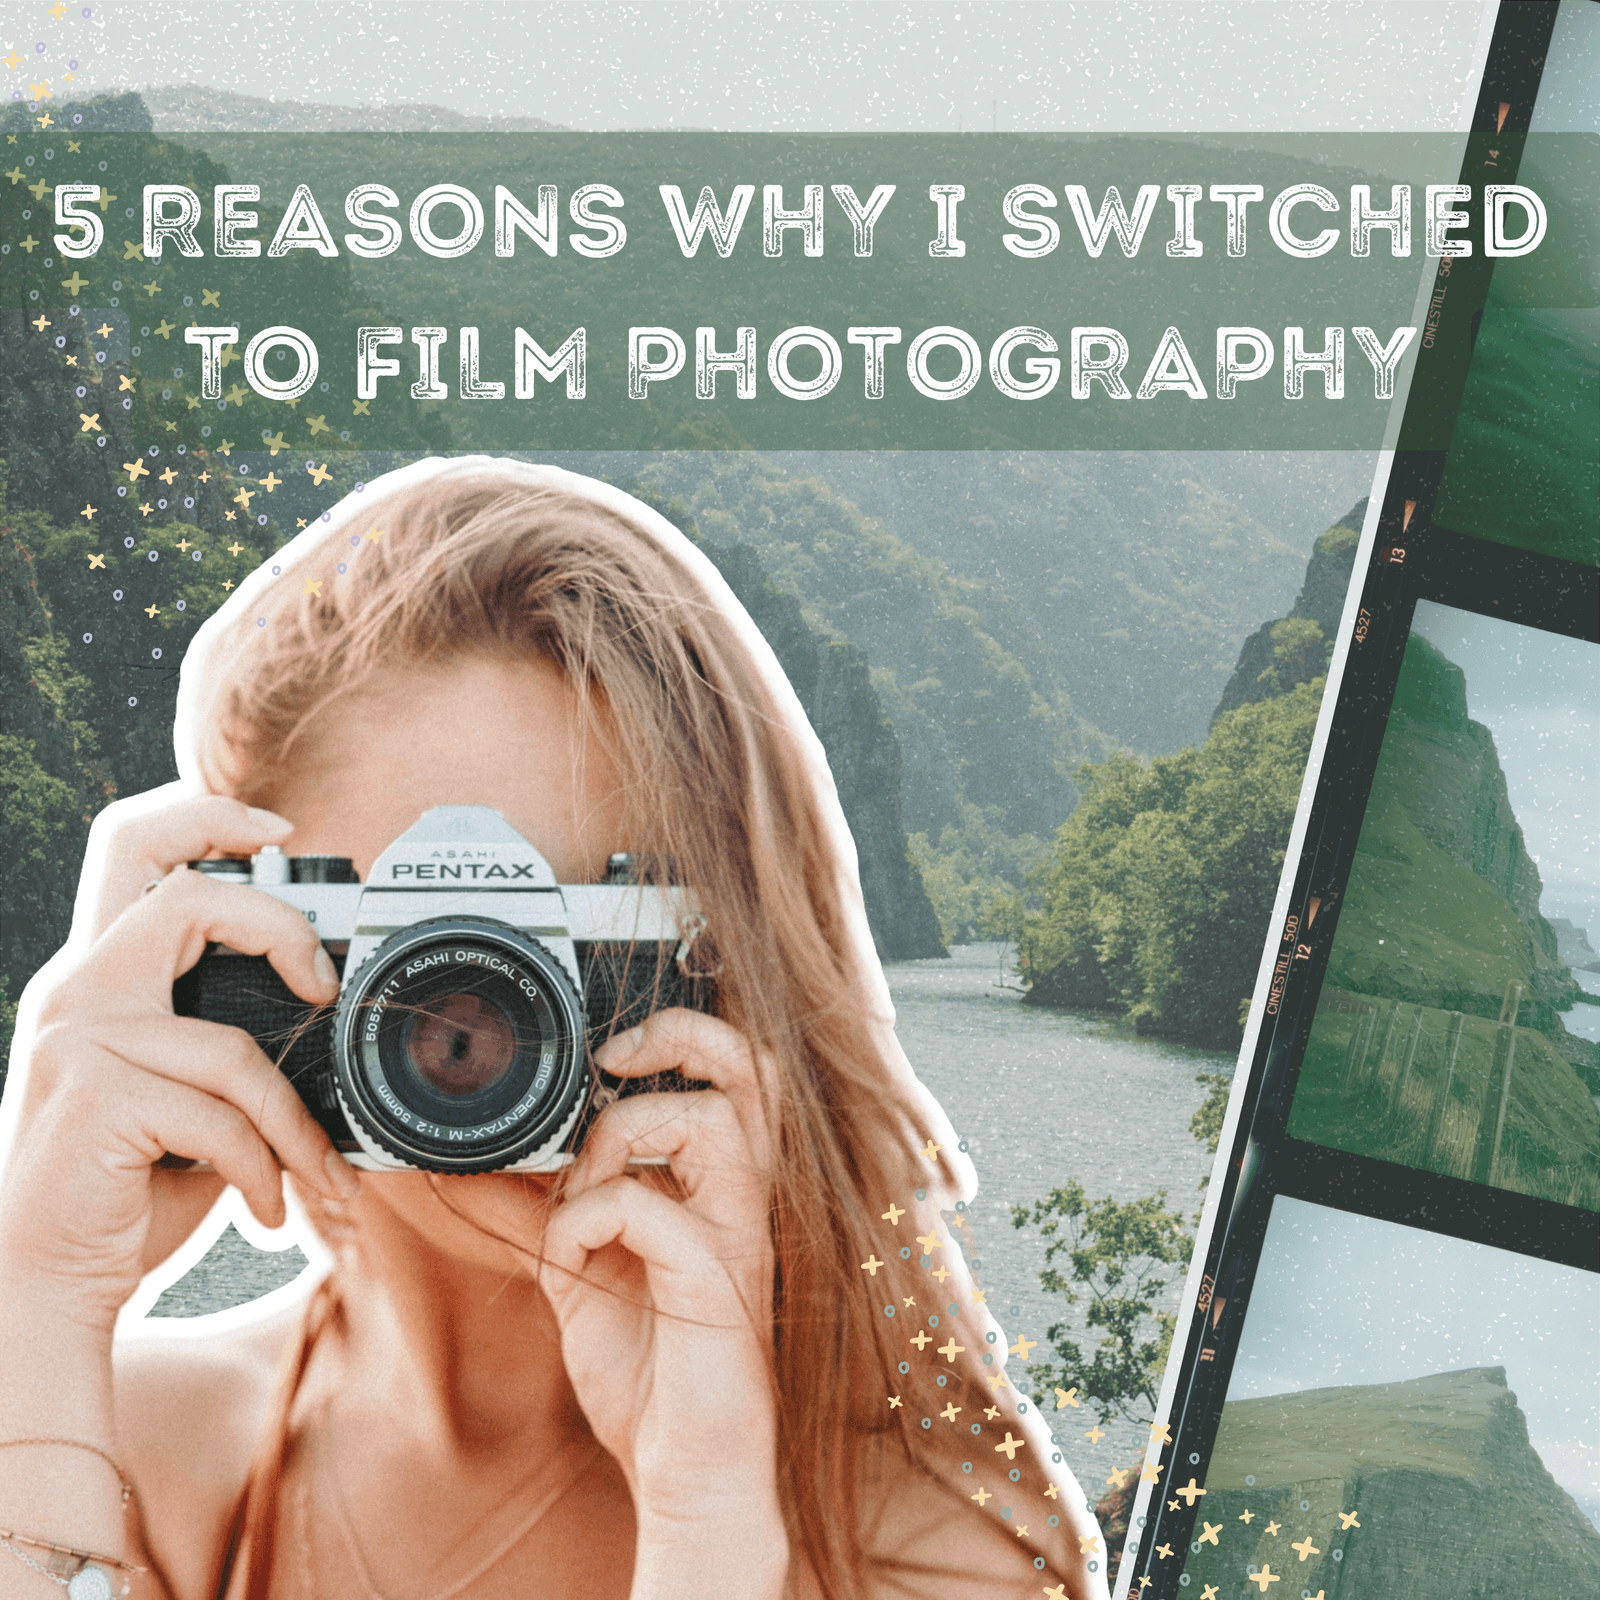 5 Reasons Why I Switched to Film Photography